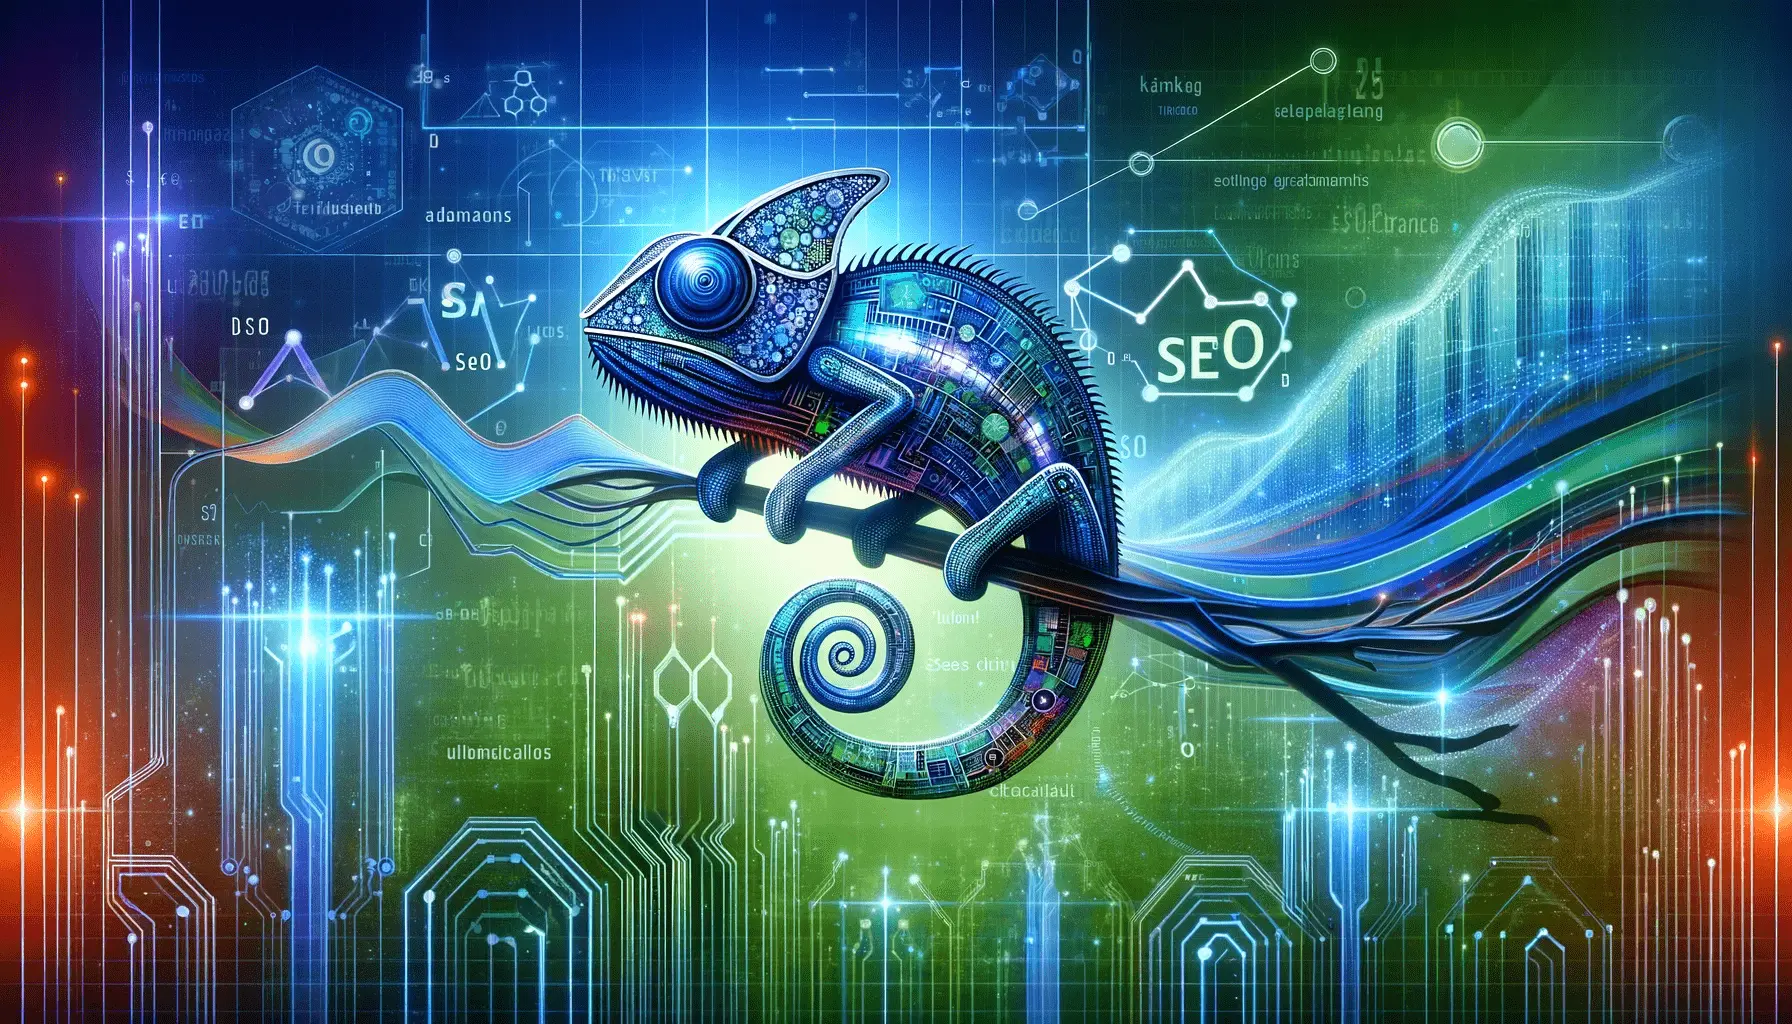 Adapting to SEO Changes and Updates